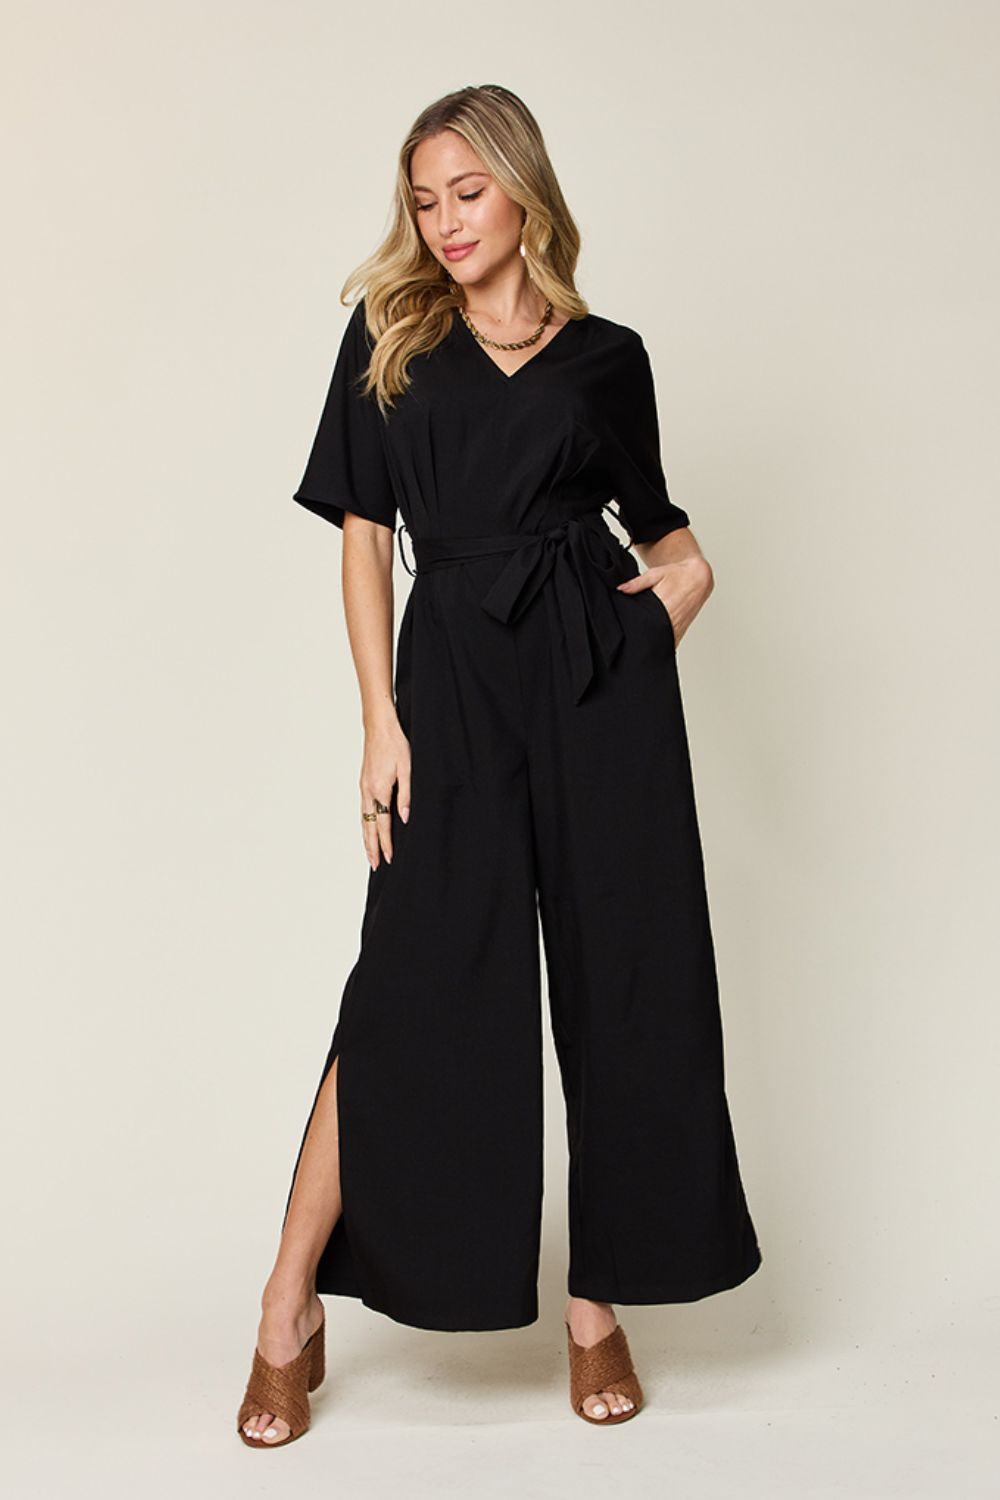 Double Take Full Size V-Neck Tie Front Short Sleeve Slit Jumpsuit - Elegant and versatile full-size jumpsuit featuring a flattering v-neckline, tie-front detail, short sleeves, and stylish leg slits. Perfect for any occasion, from casual outings to special events. Shop now for trendy fashion!"